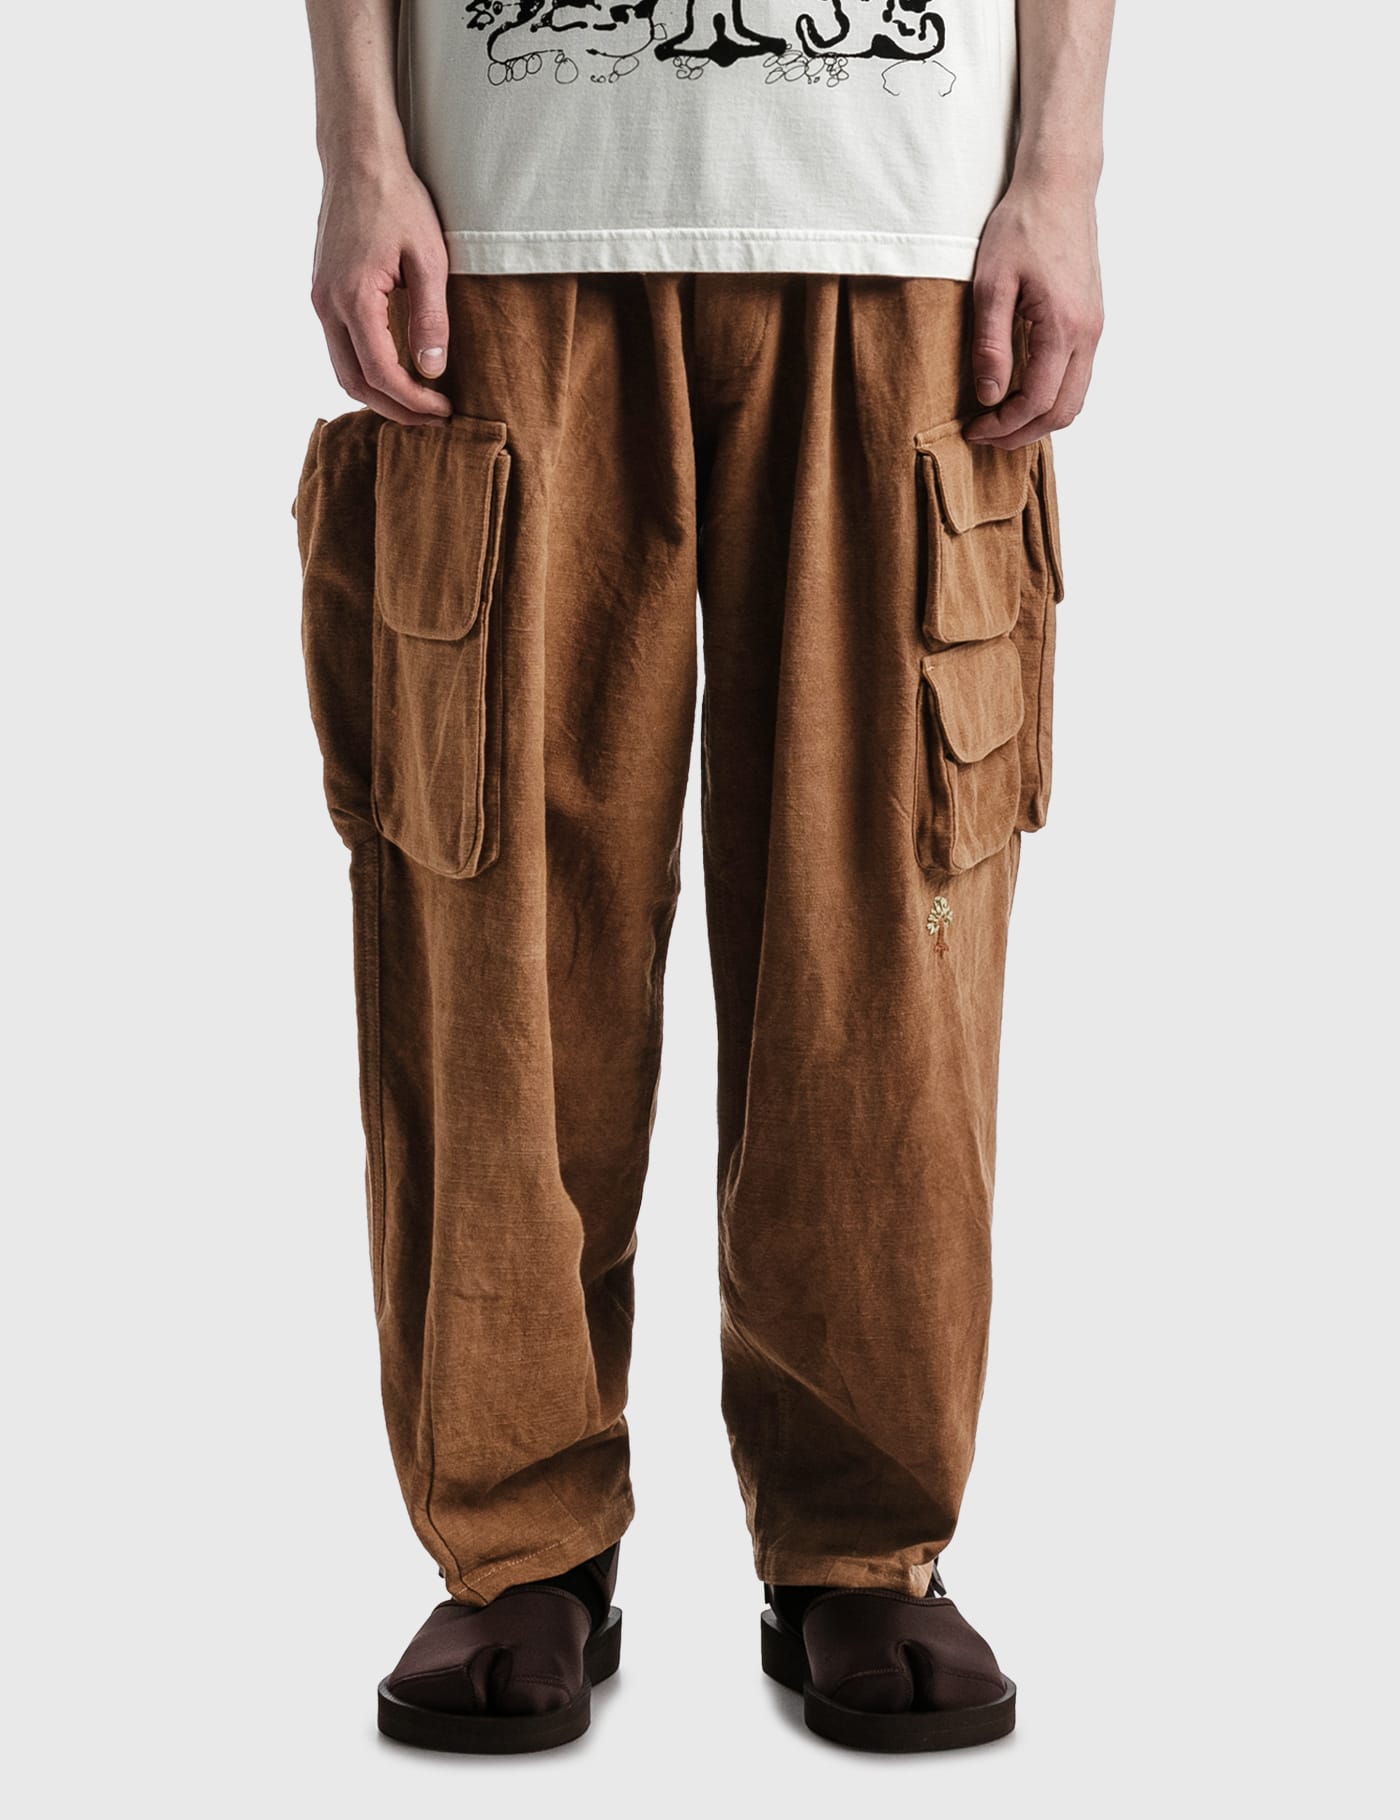 Story Mfg - Forager Pants | HBX - Globally Curated Fashion and 